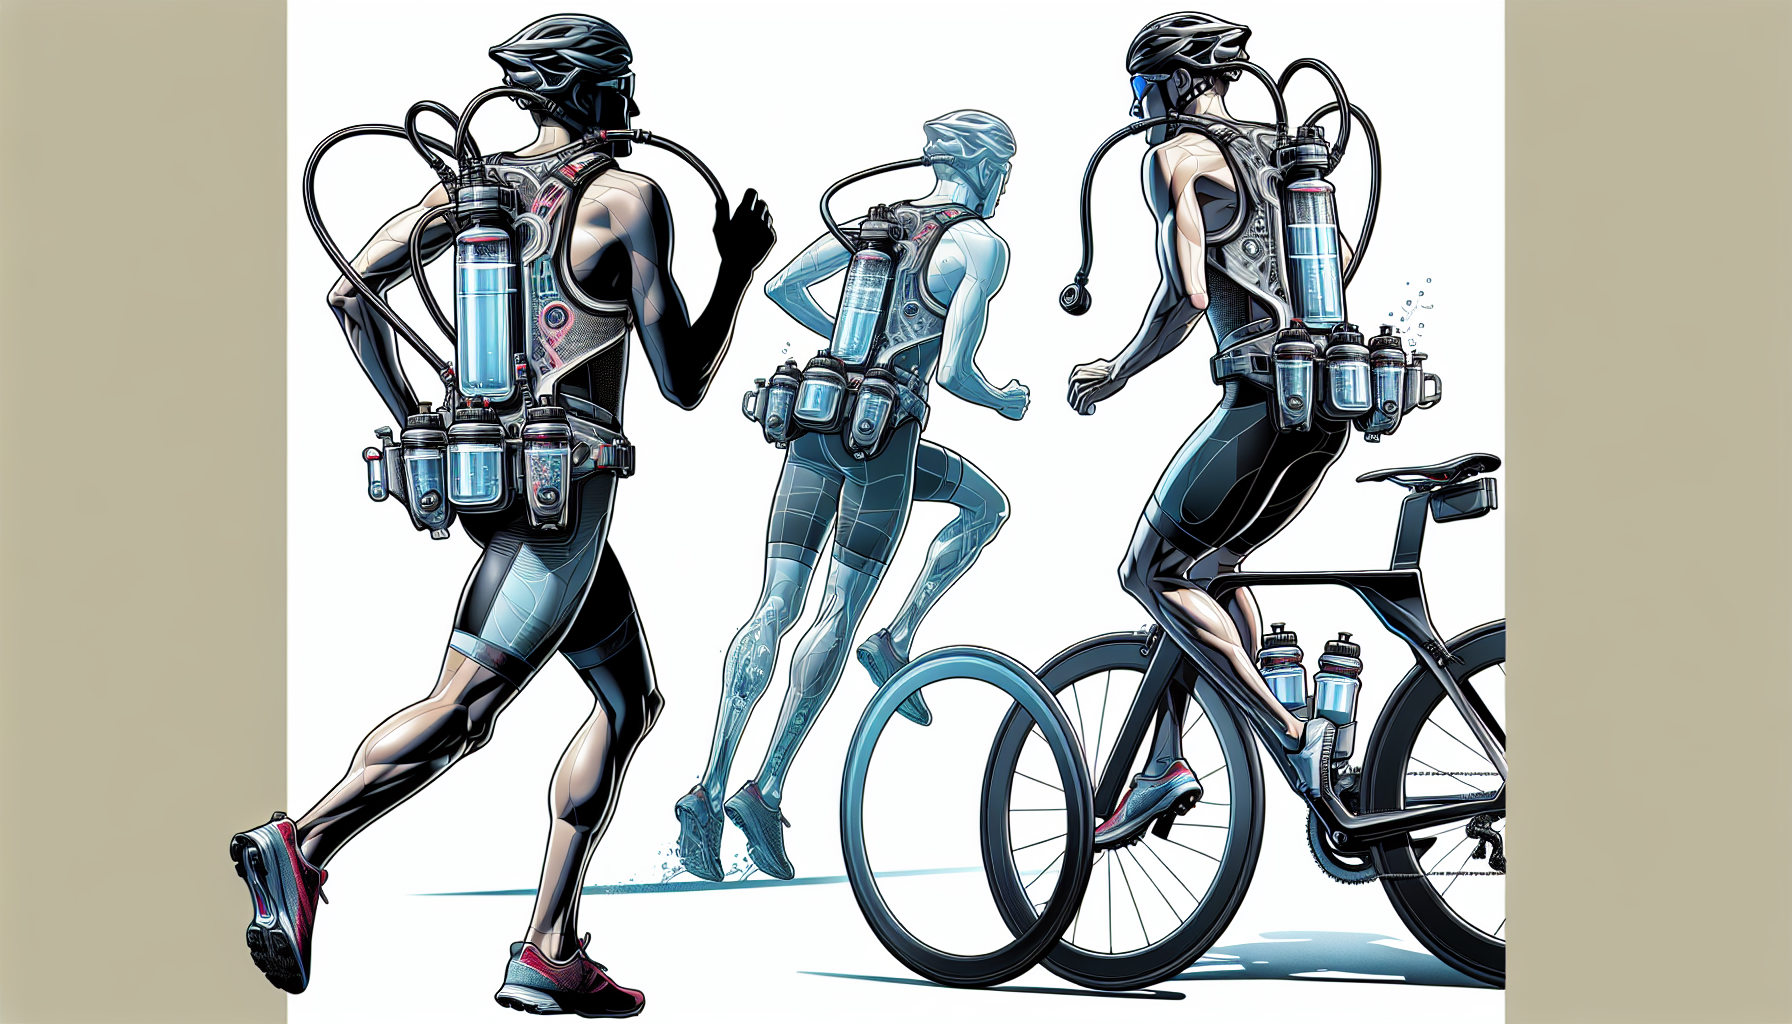 Hydration systems for biking and running